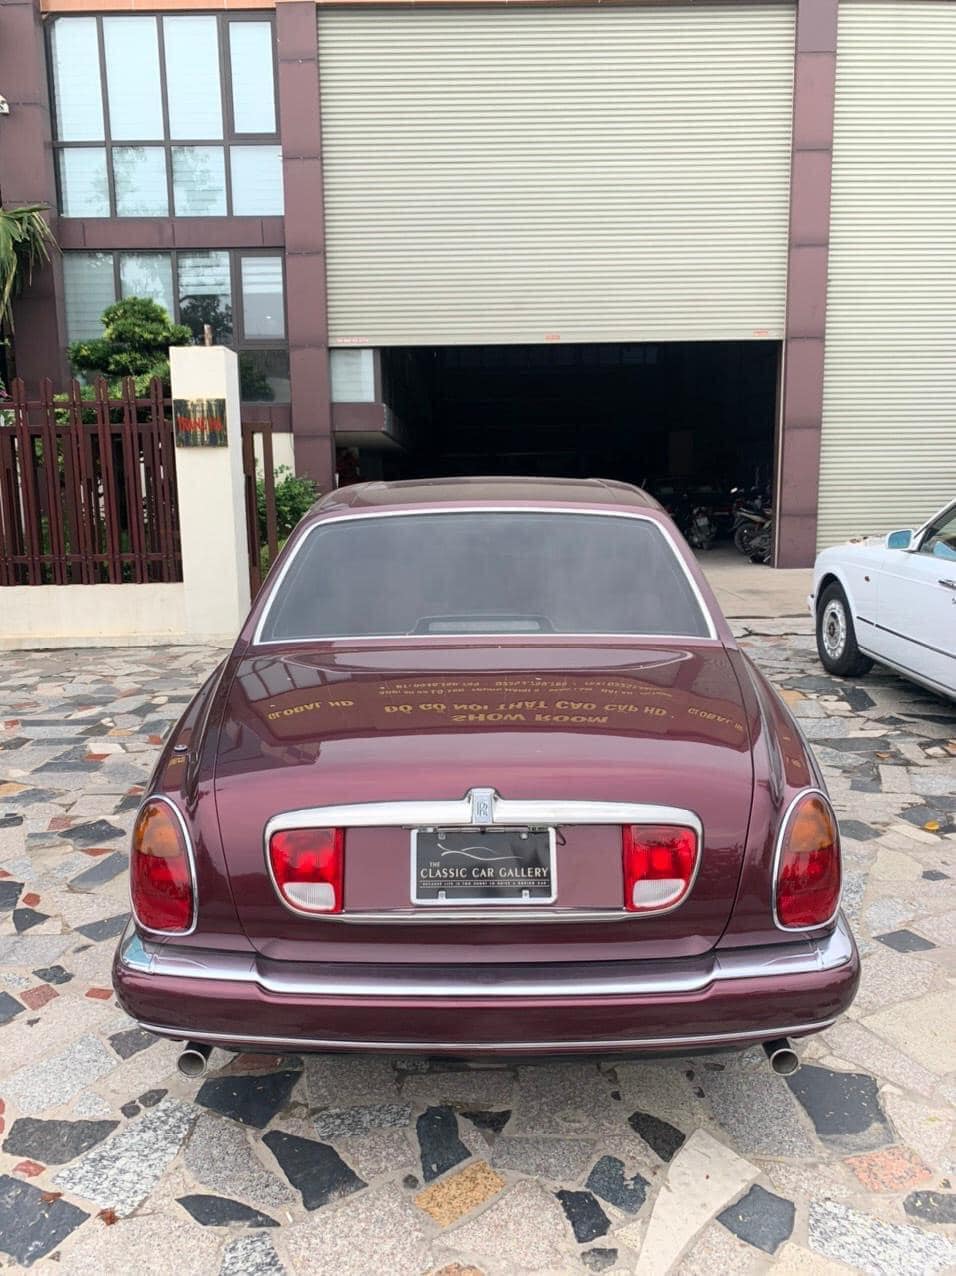 No Reserve 1999 RollsRoyce Silver Seraph for sale on BaT Auctions  sold  for 40500 on June 29 2021 Lot 50417  Bring a Trailer